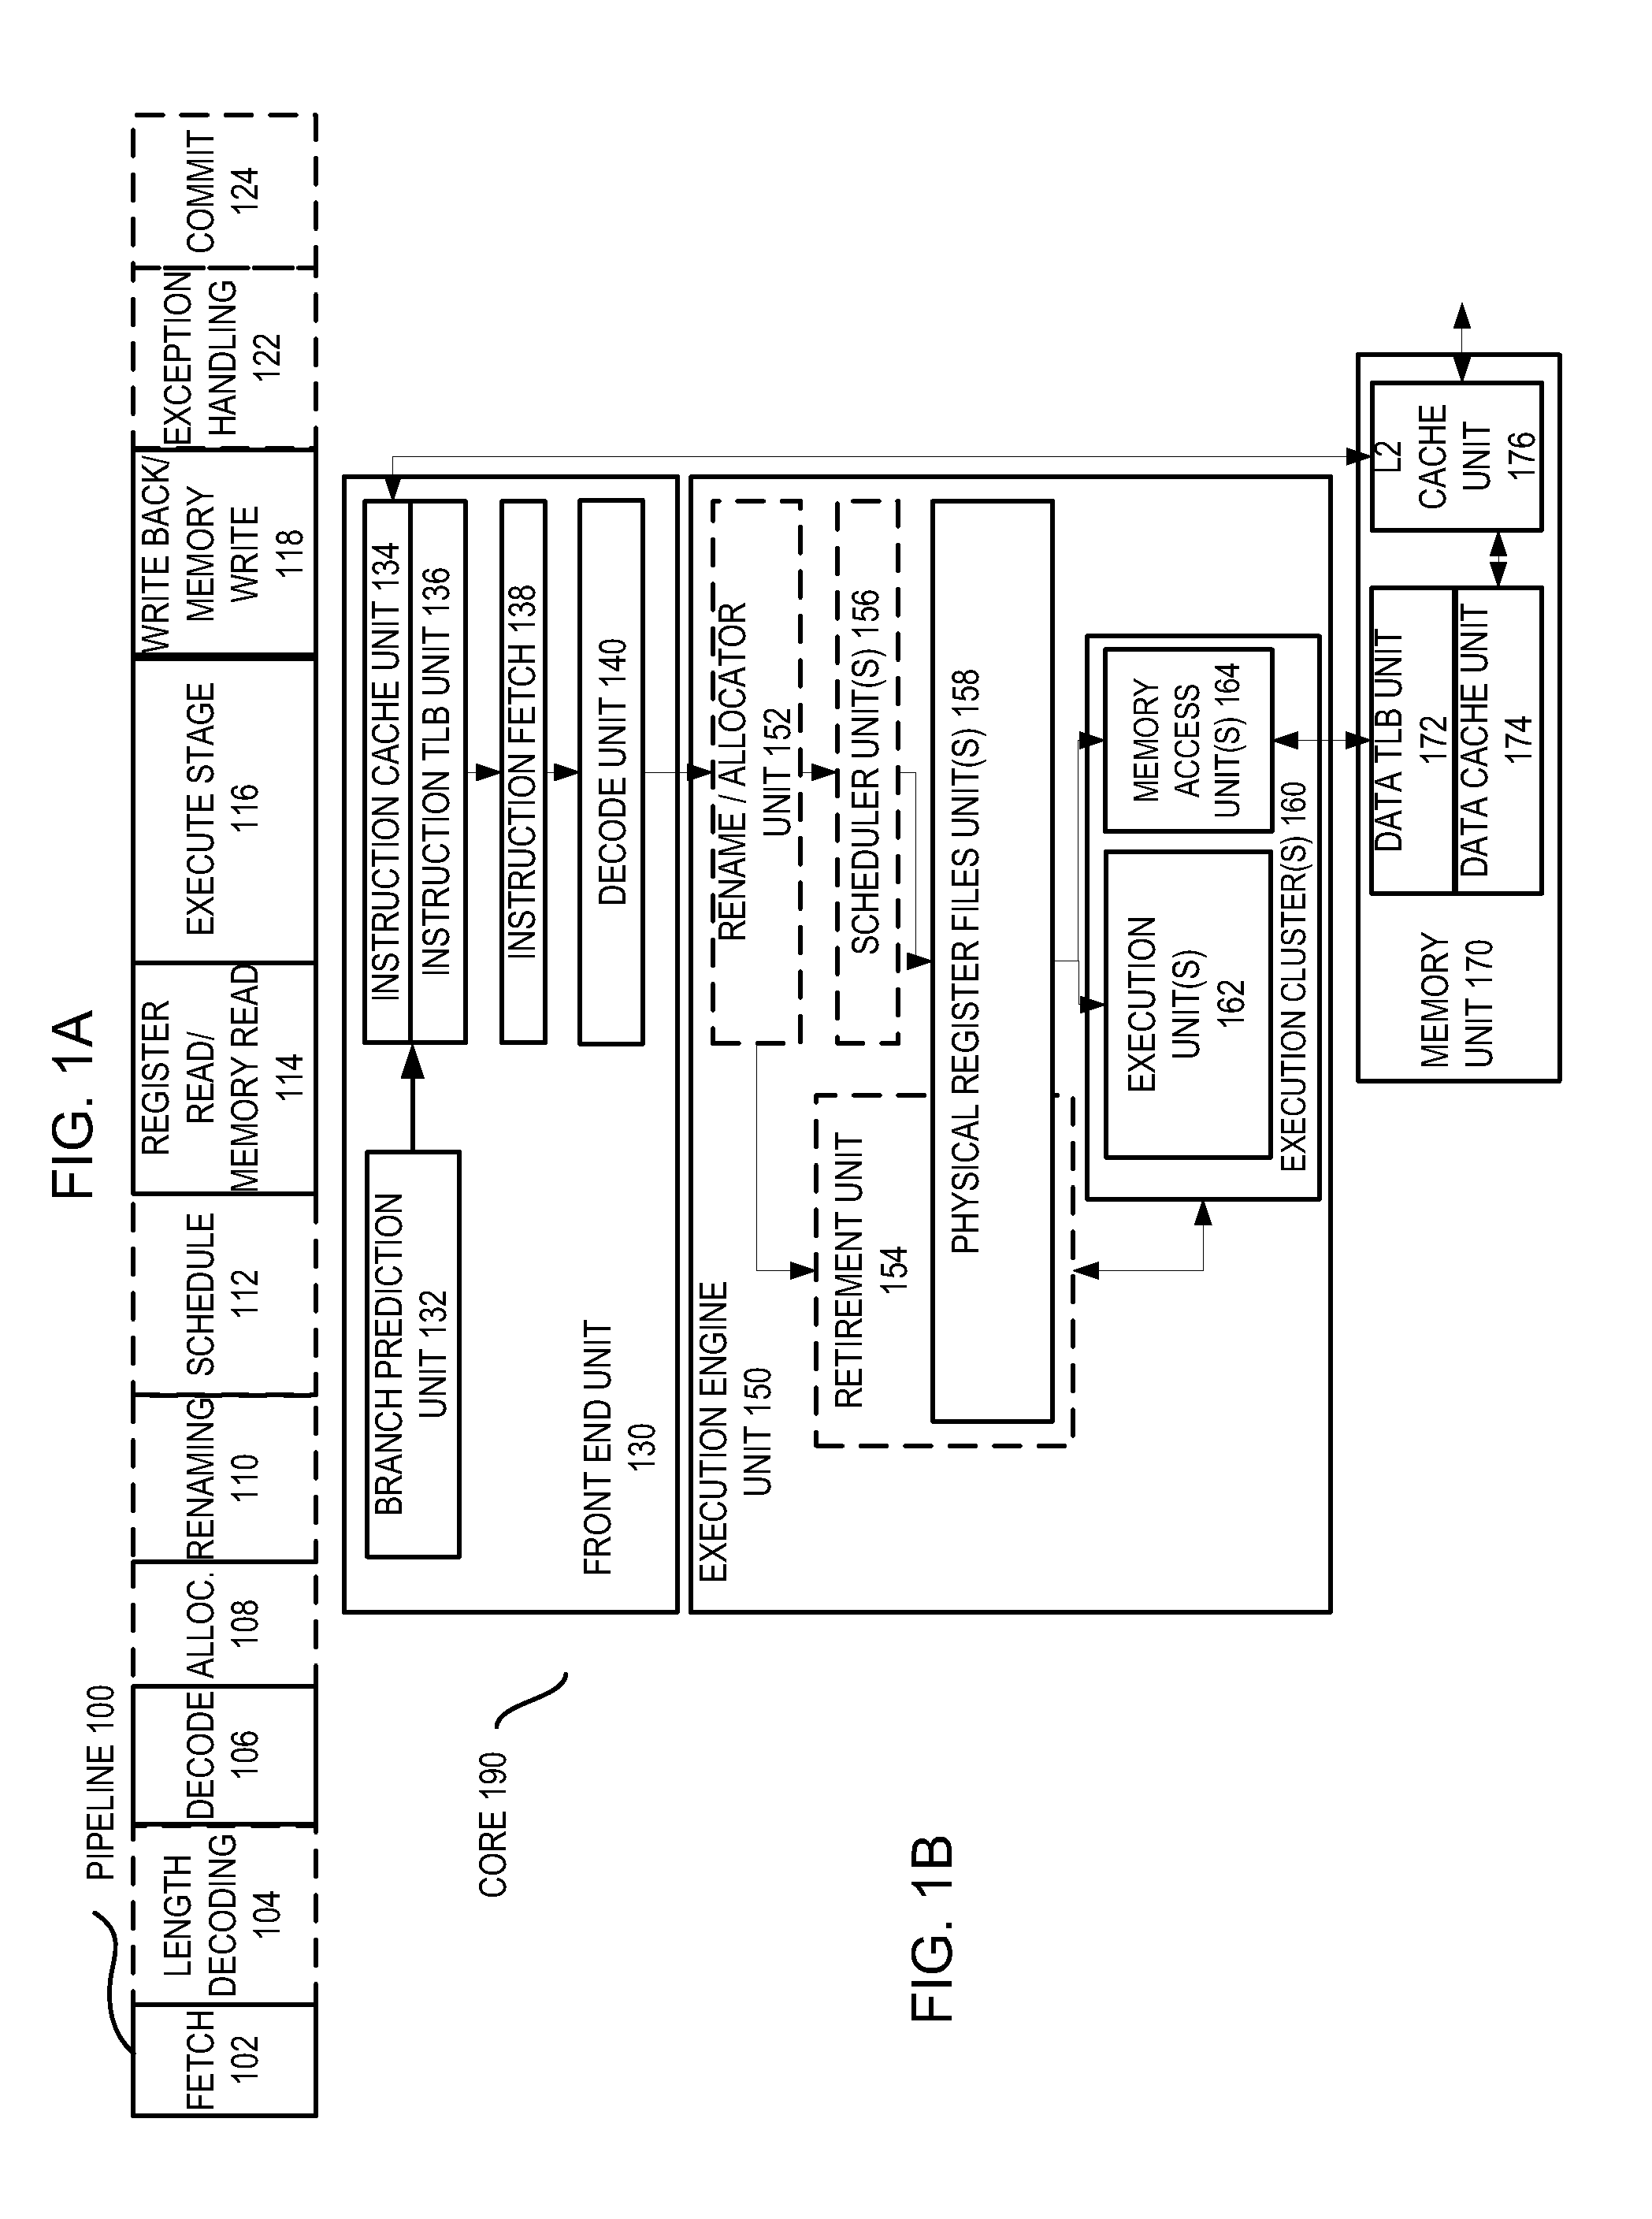 Apparatus and method for implementing zero-knowledge proof security techniques on a computing platform